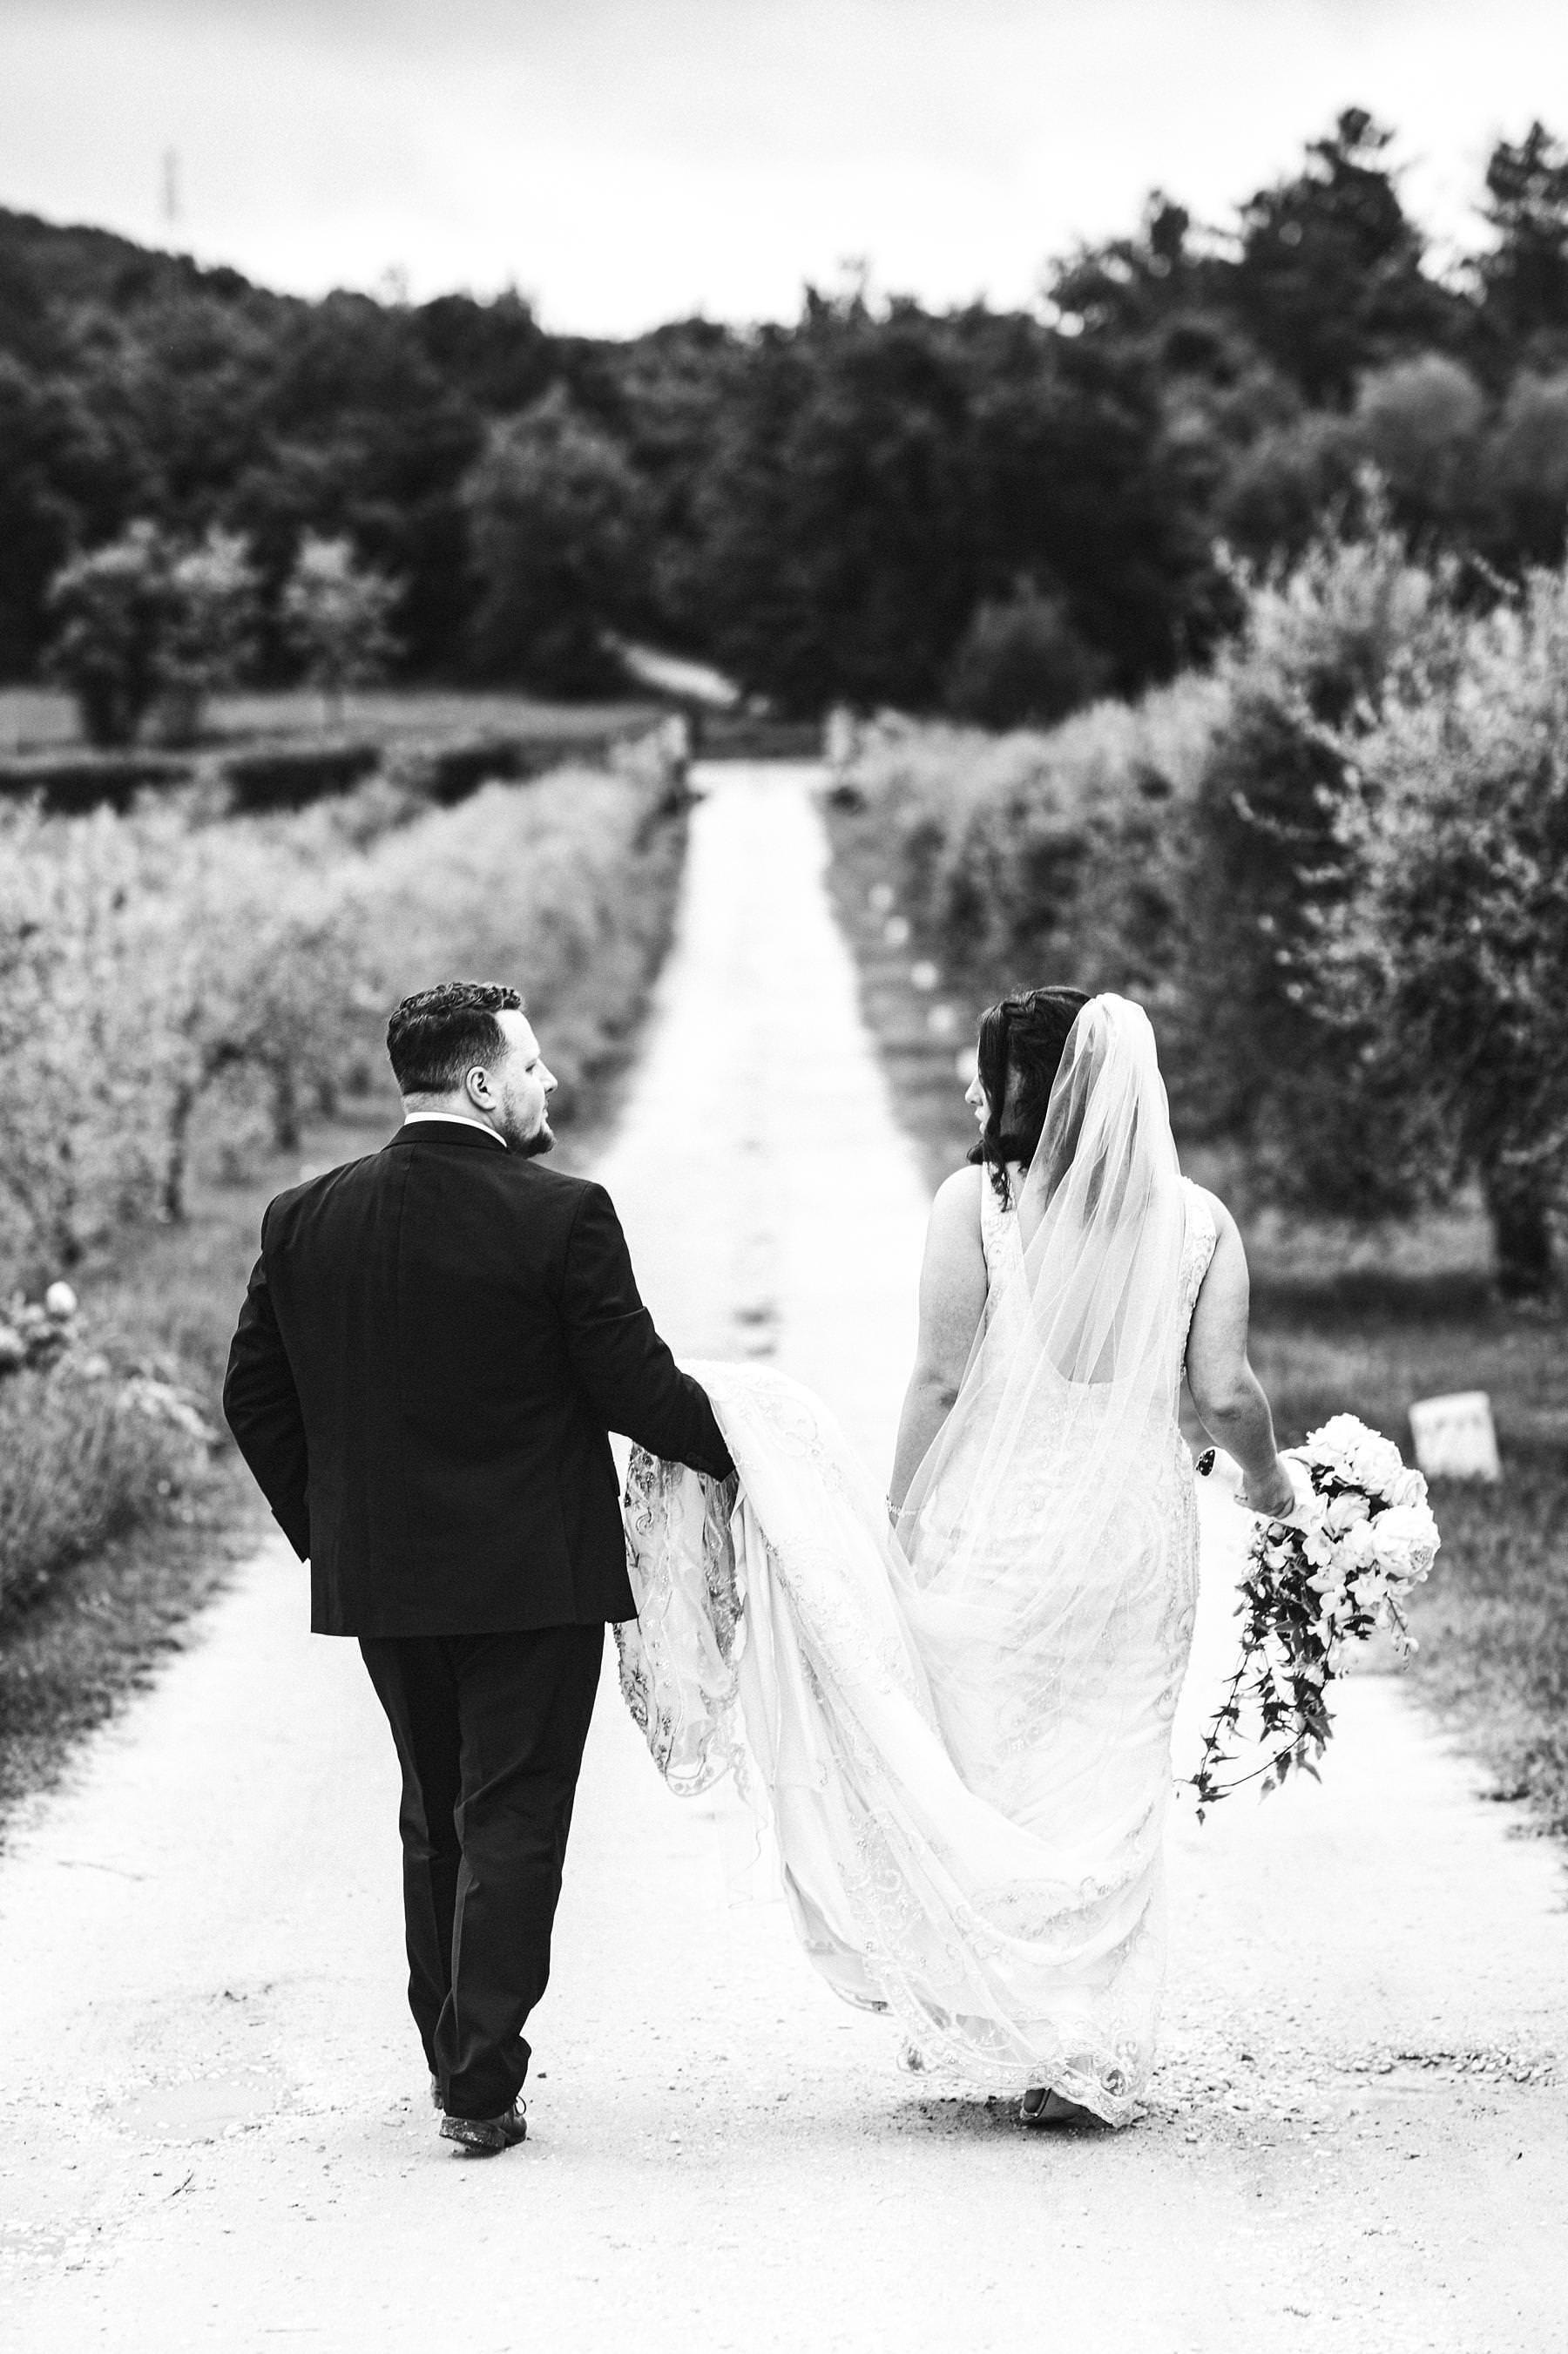 Lovely bride and groom wedding portrait at Villa Le Bolli venue in Tuscany countryside near Radicondoli medieval town